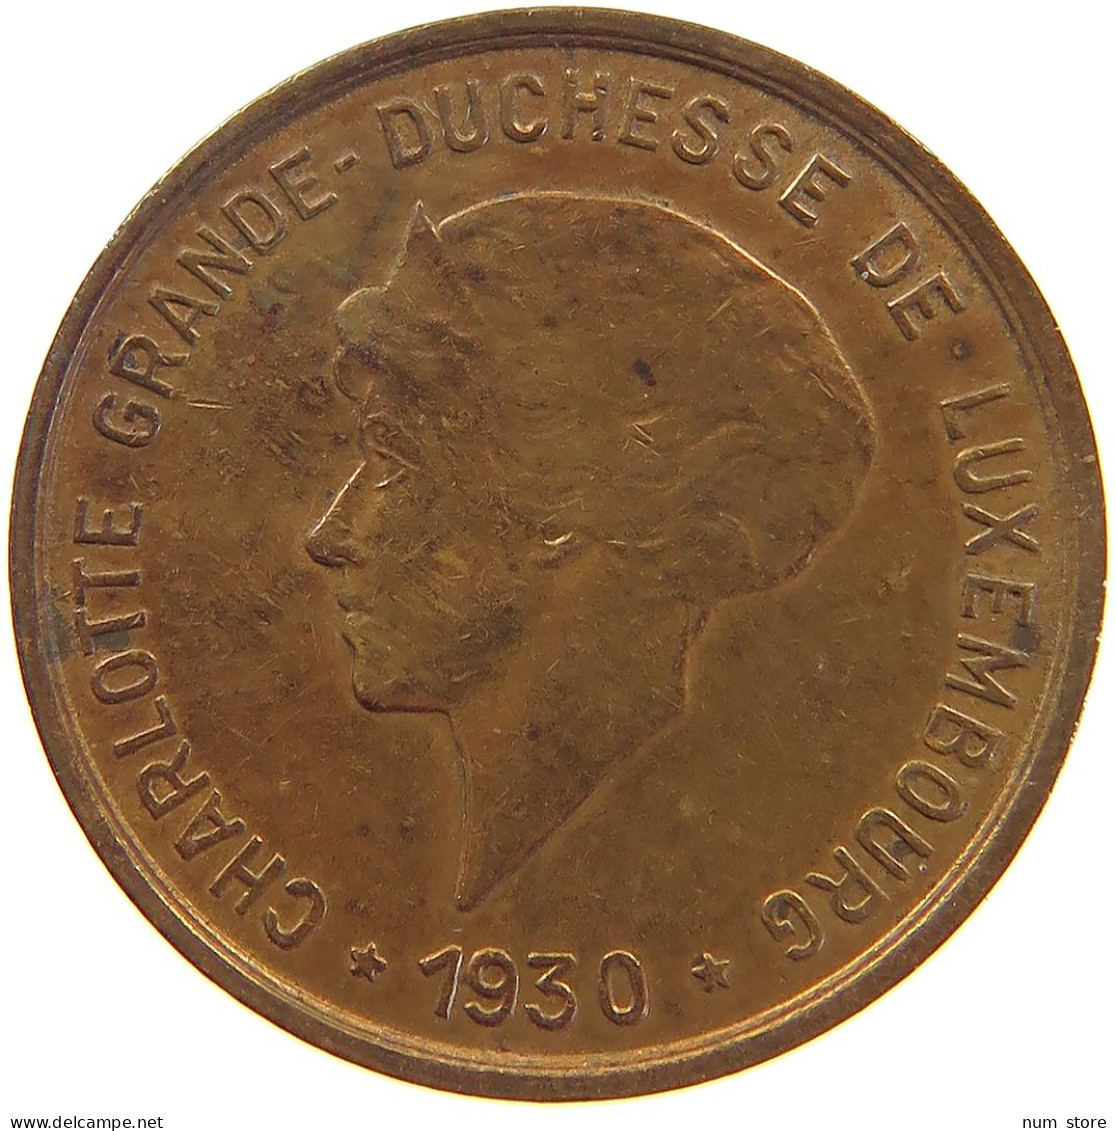 LUXEMBOURG 5 CENTIMES 1930 #c050 0381 - Luxembourg